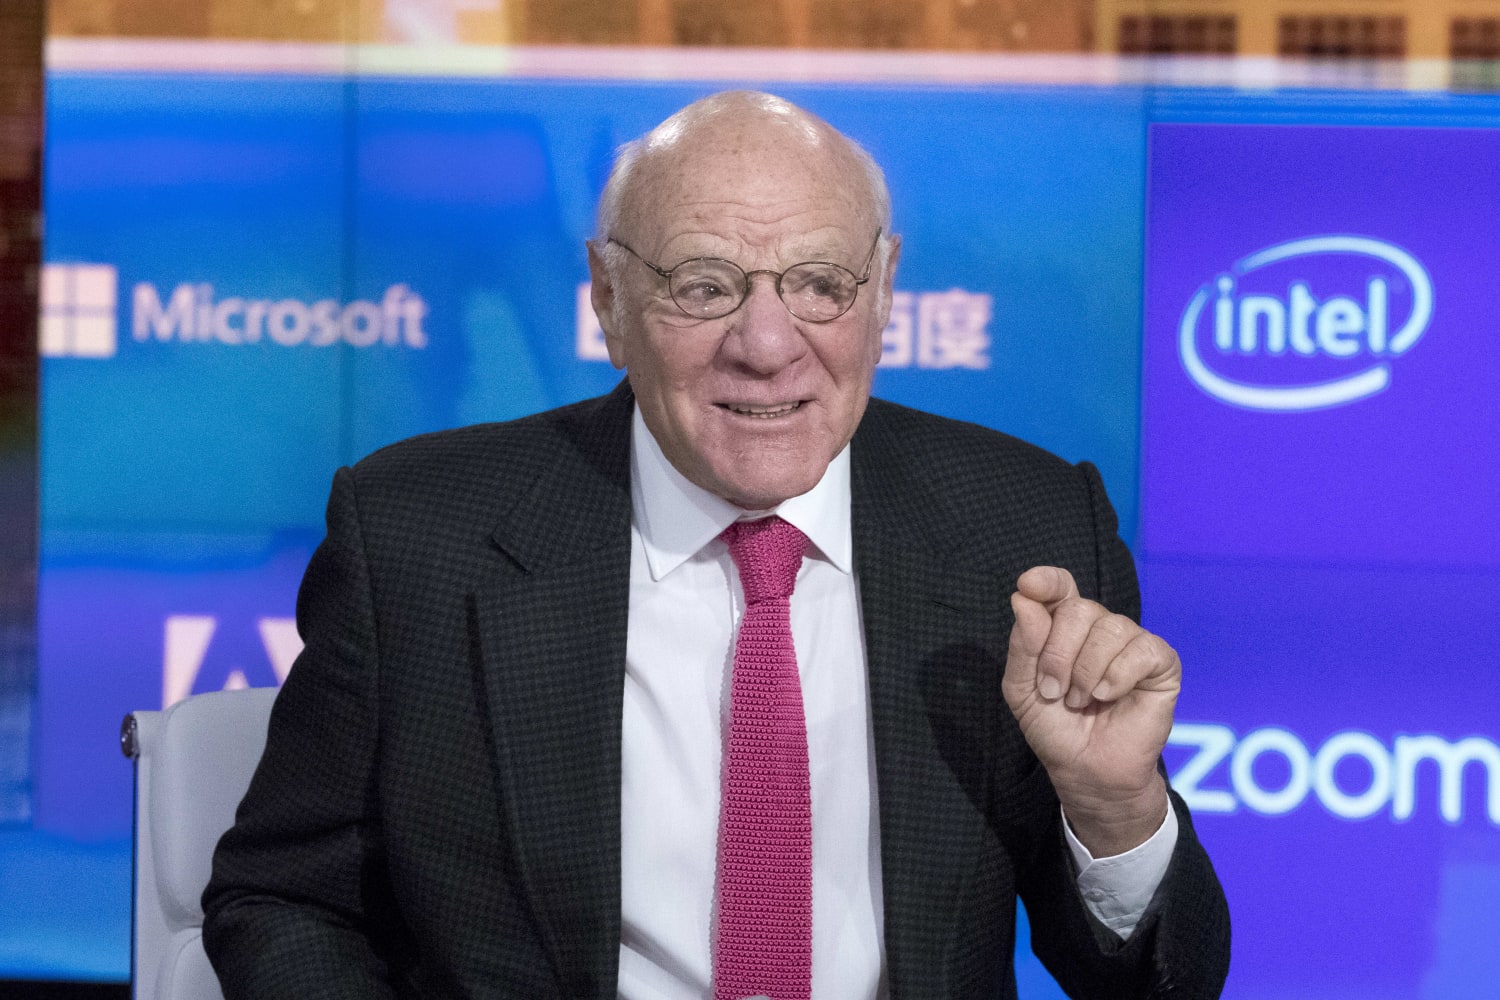 Barry Diller calls for an end to 'absurd' earnings guidance, says his firms won't do it anymore